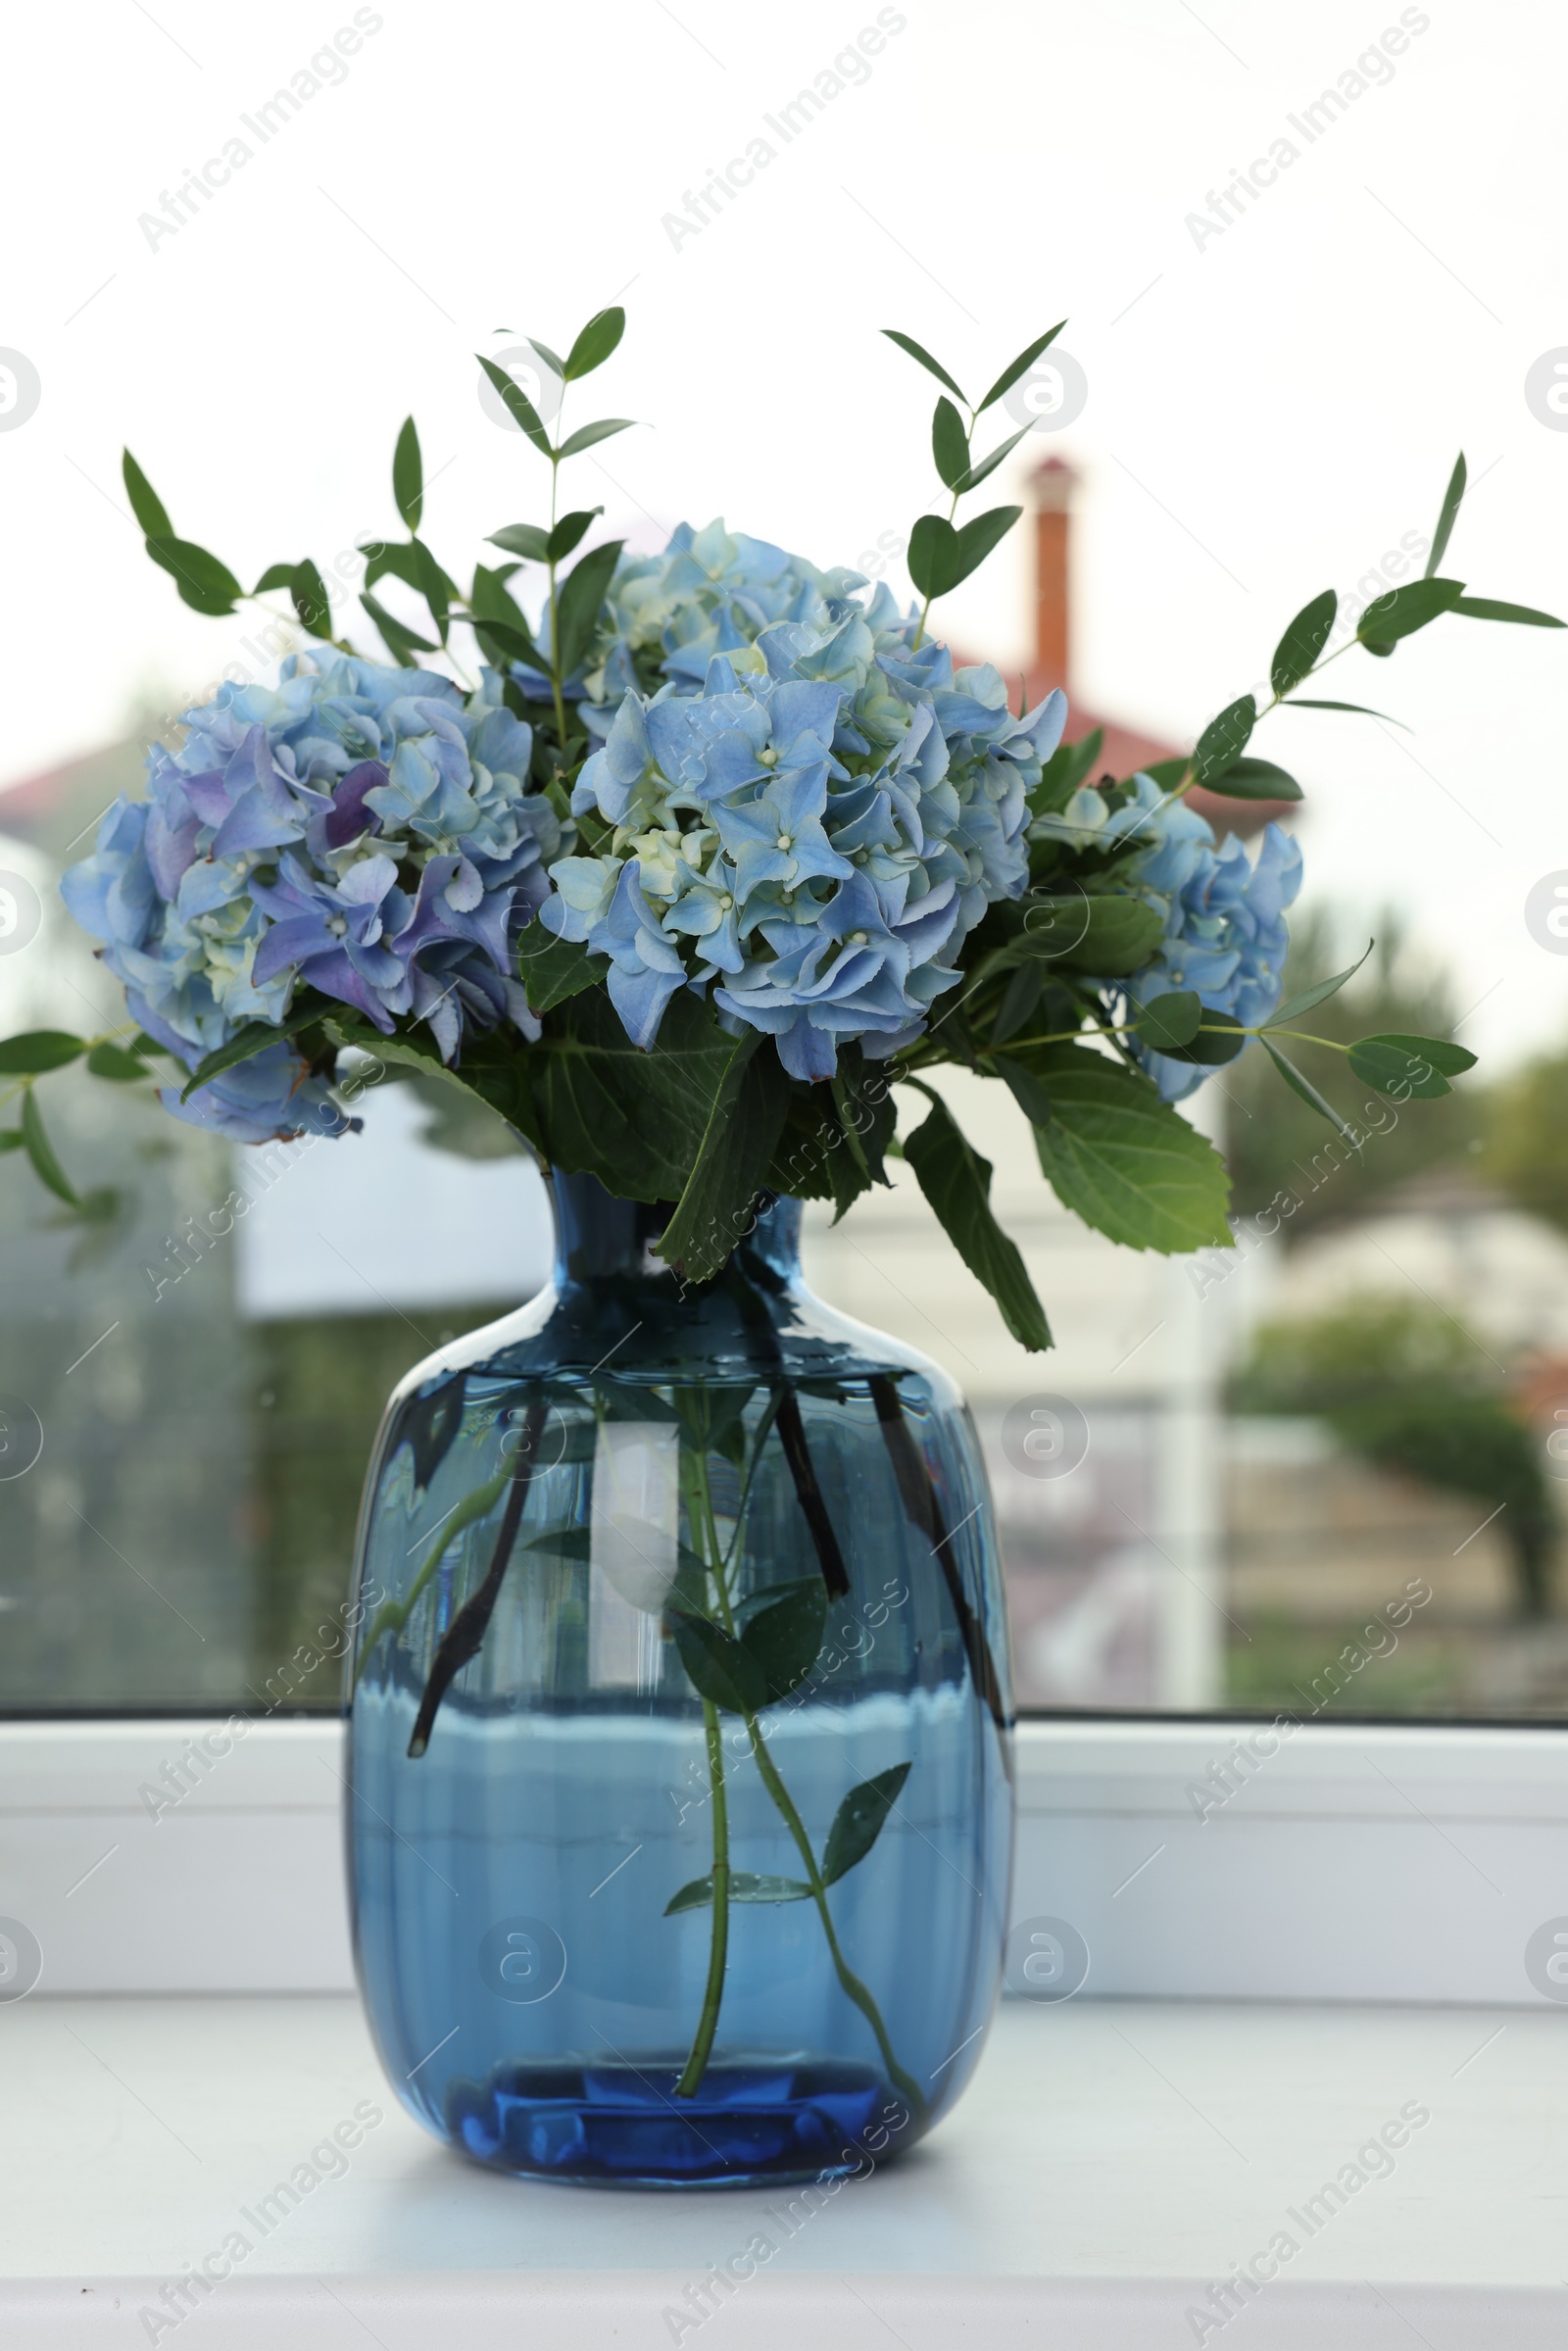 Photo of Beautiful blue hortensia flowers in vase on window sill indoors